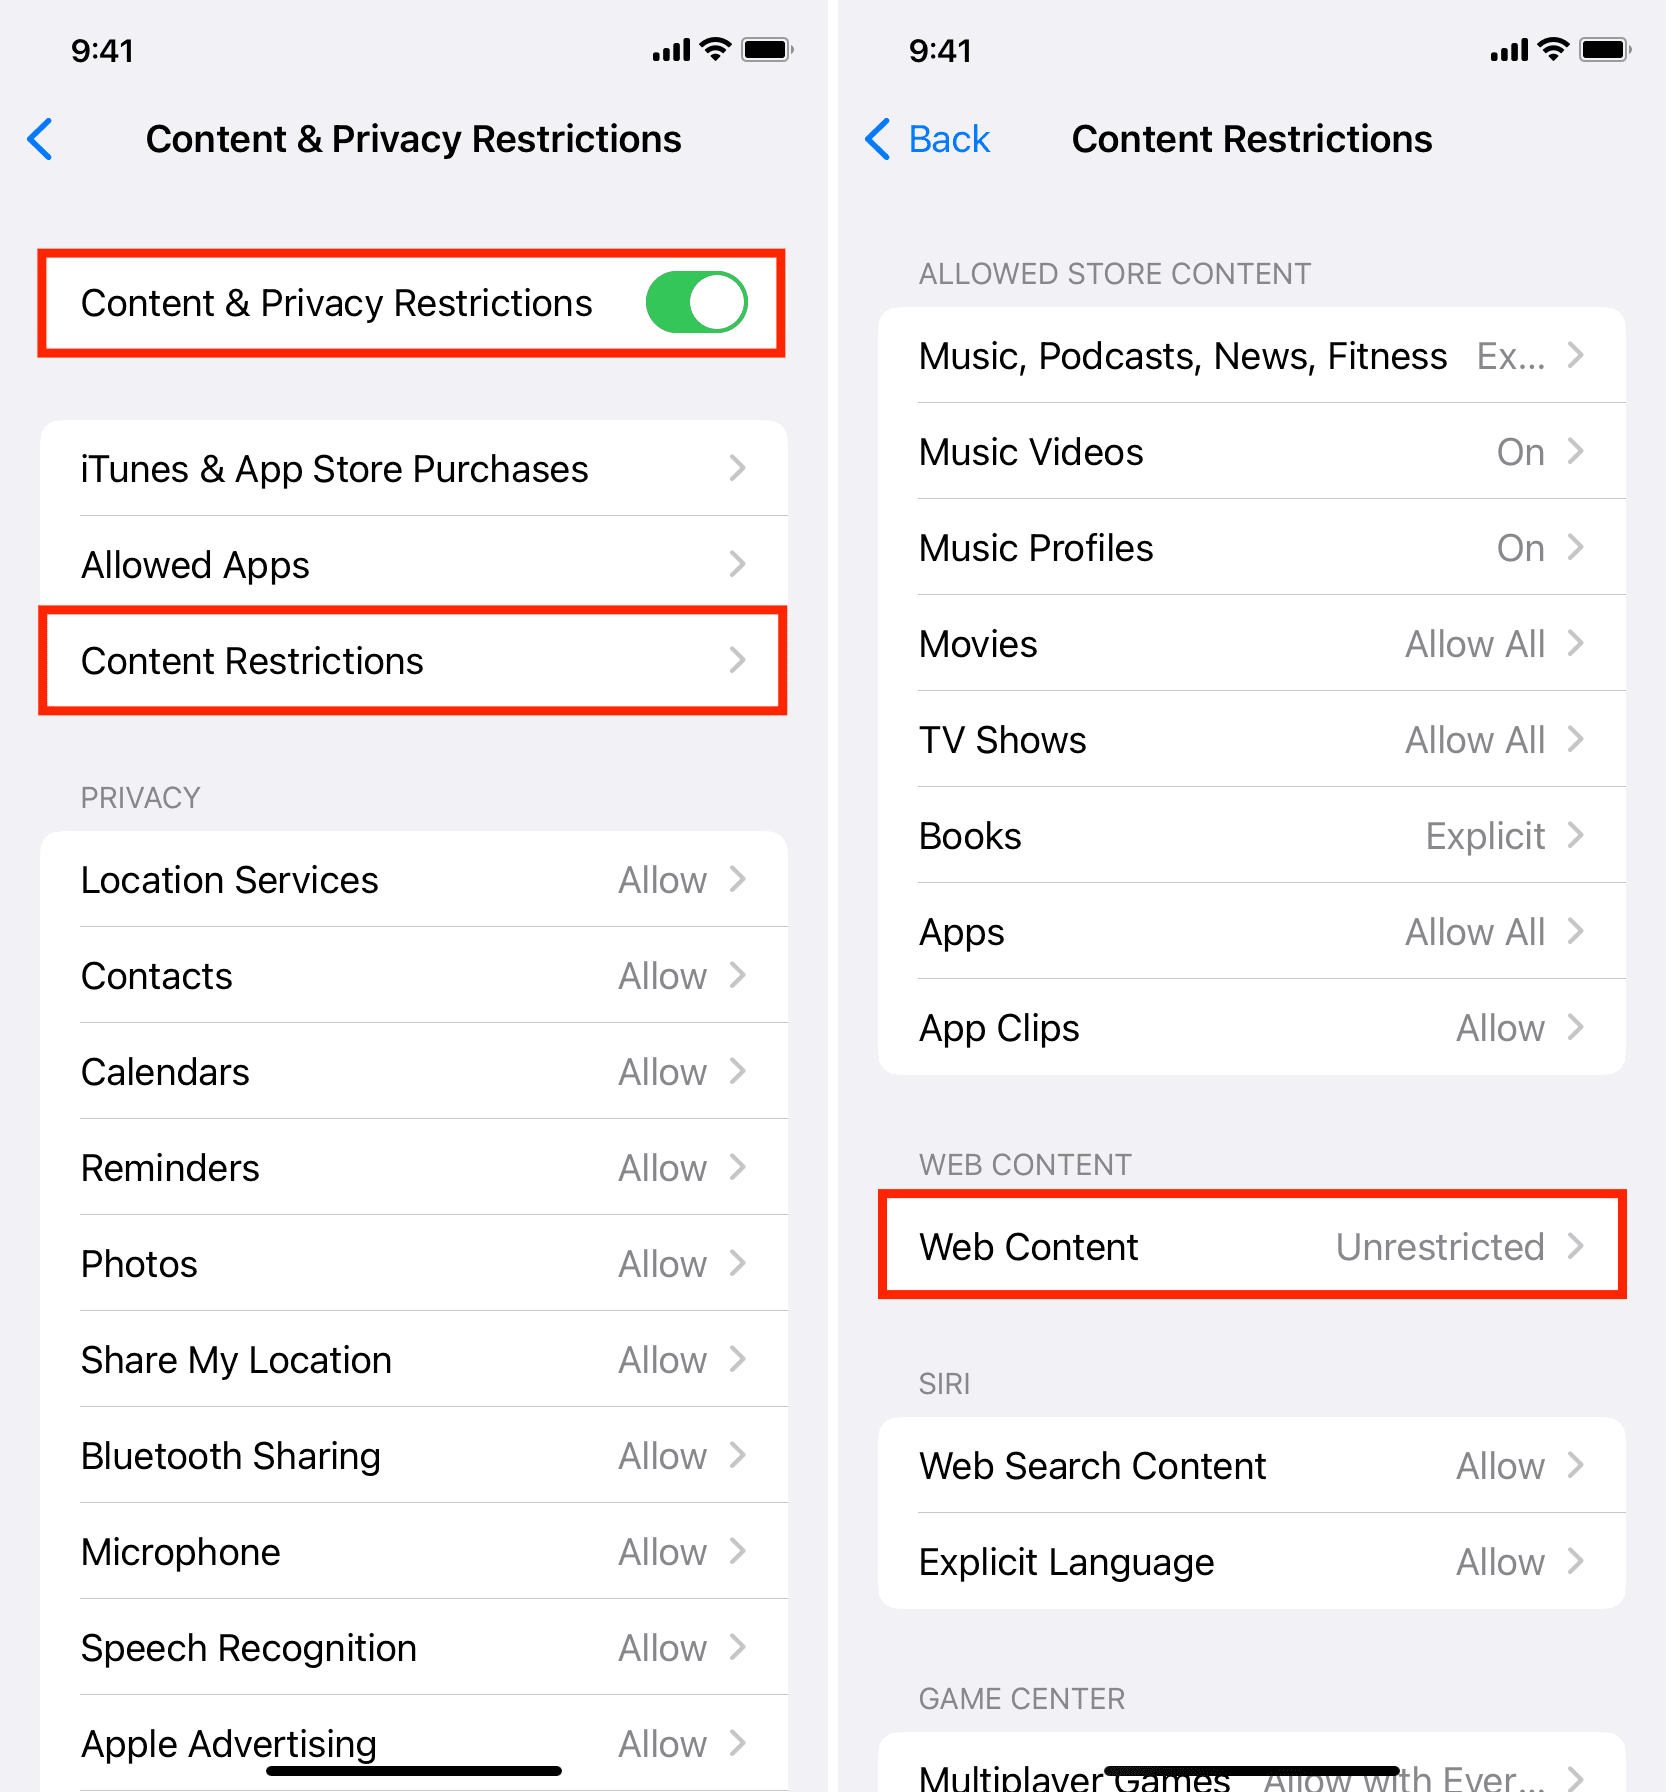 Web Content in iPhone Content Restrictions settings